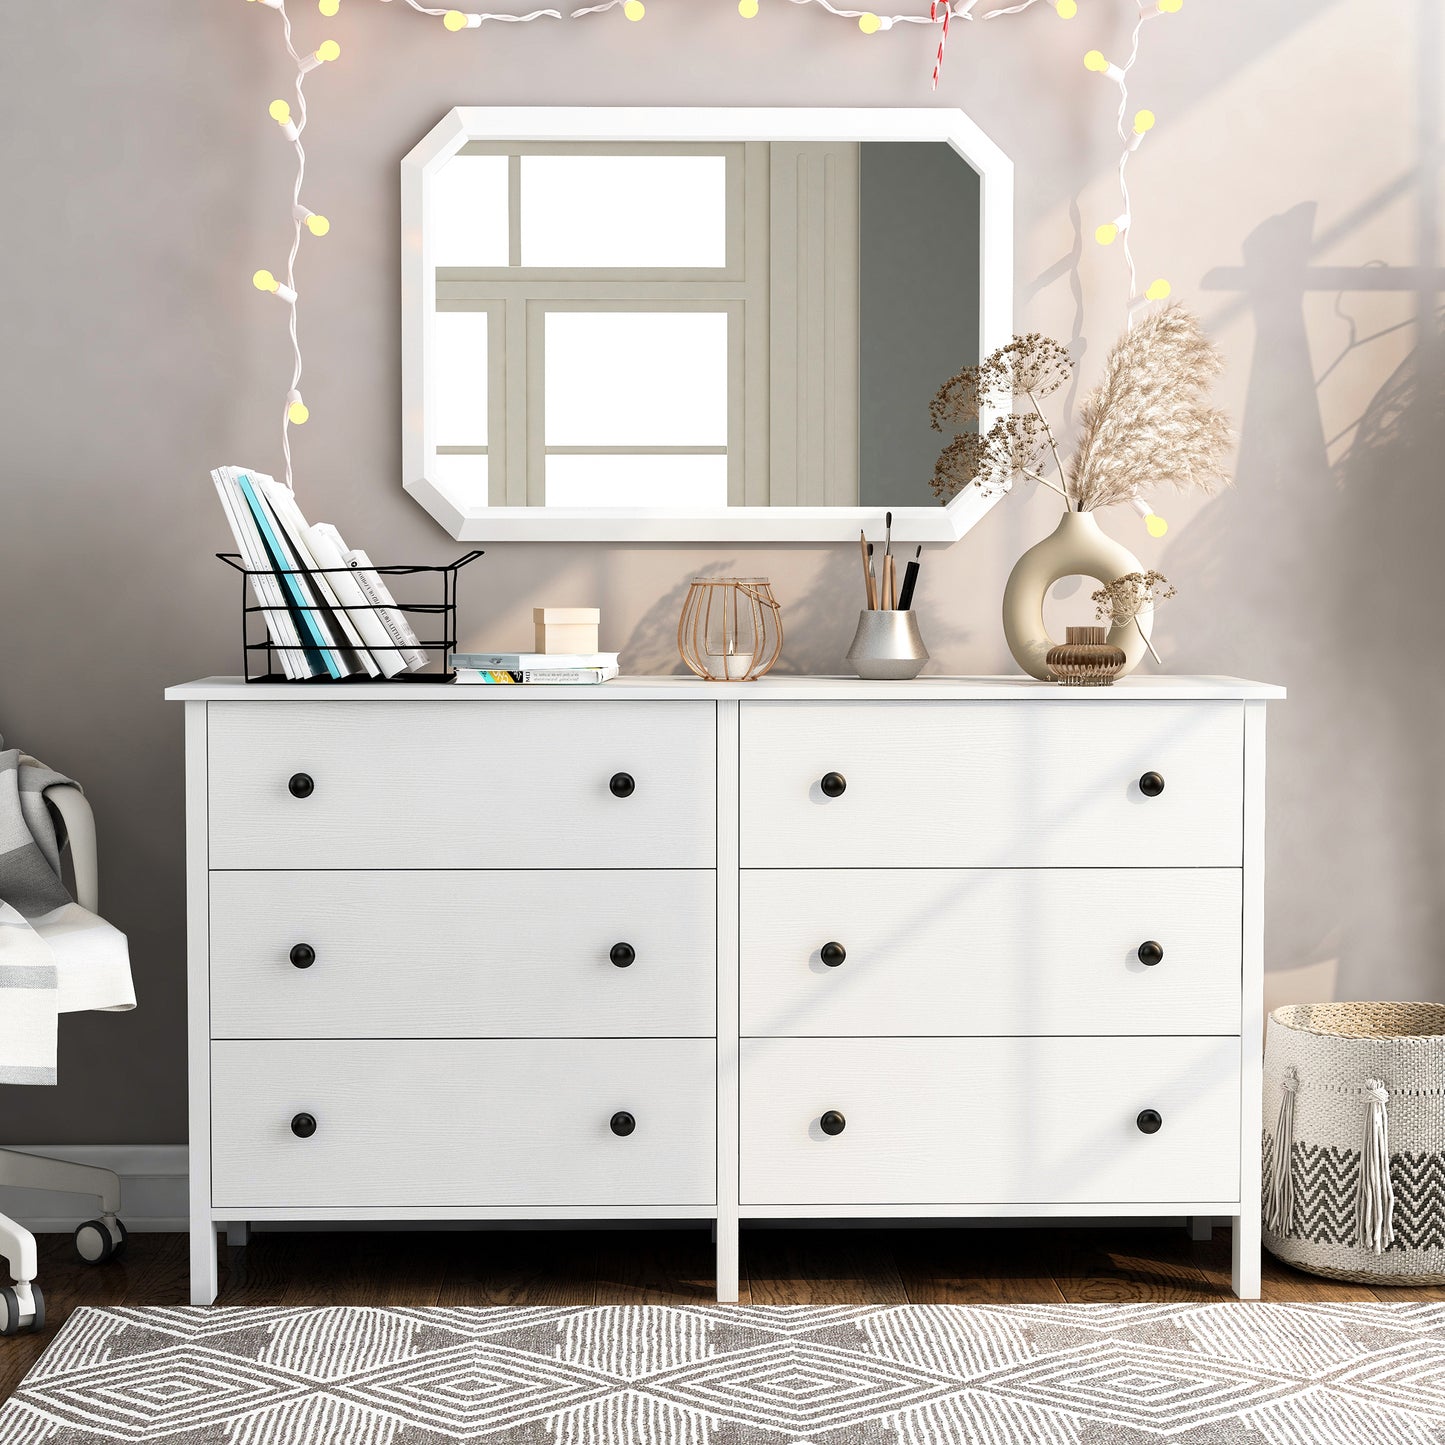 Front-facing transitional white six-drawer youth dresser in a bedroom with accessories